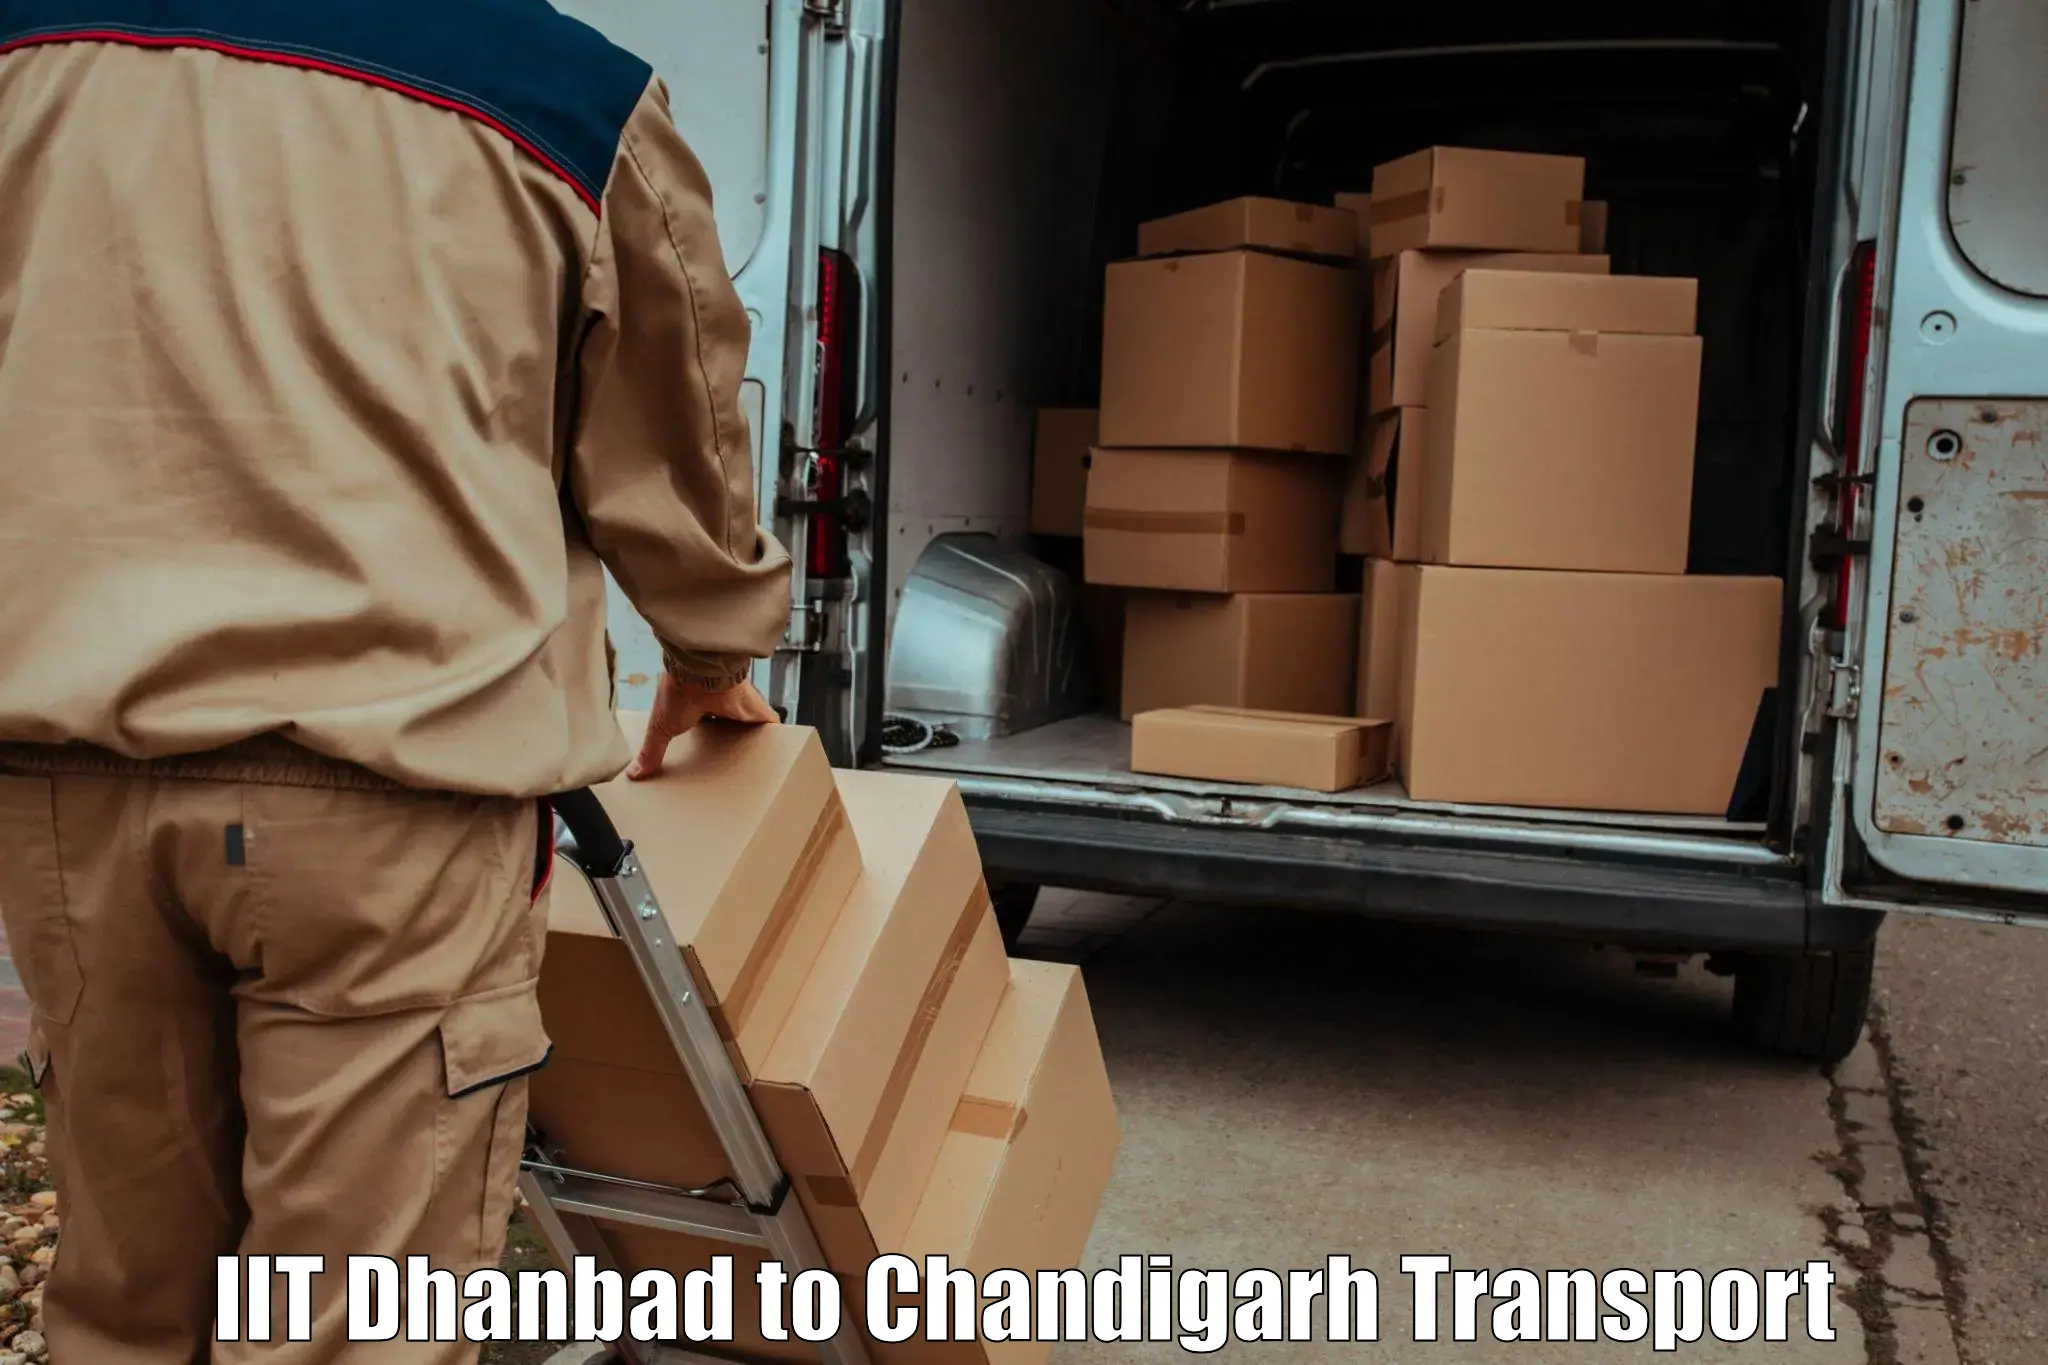 Luggage transport services IIT Dhanbad to Chandigarh